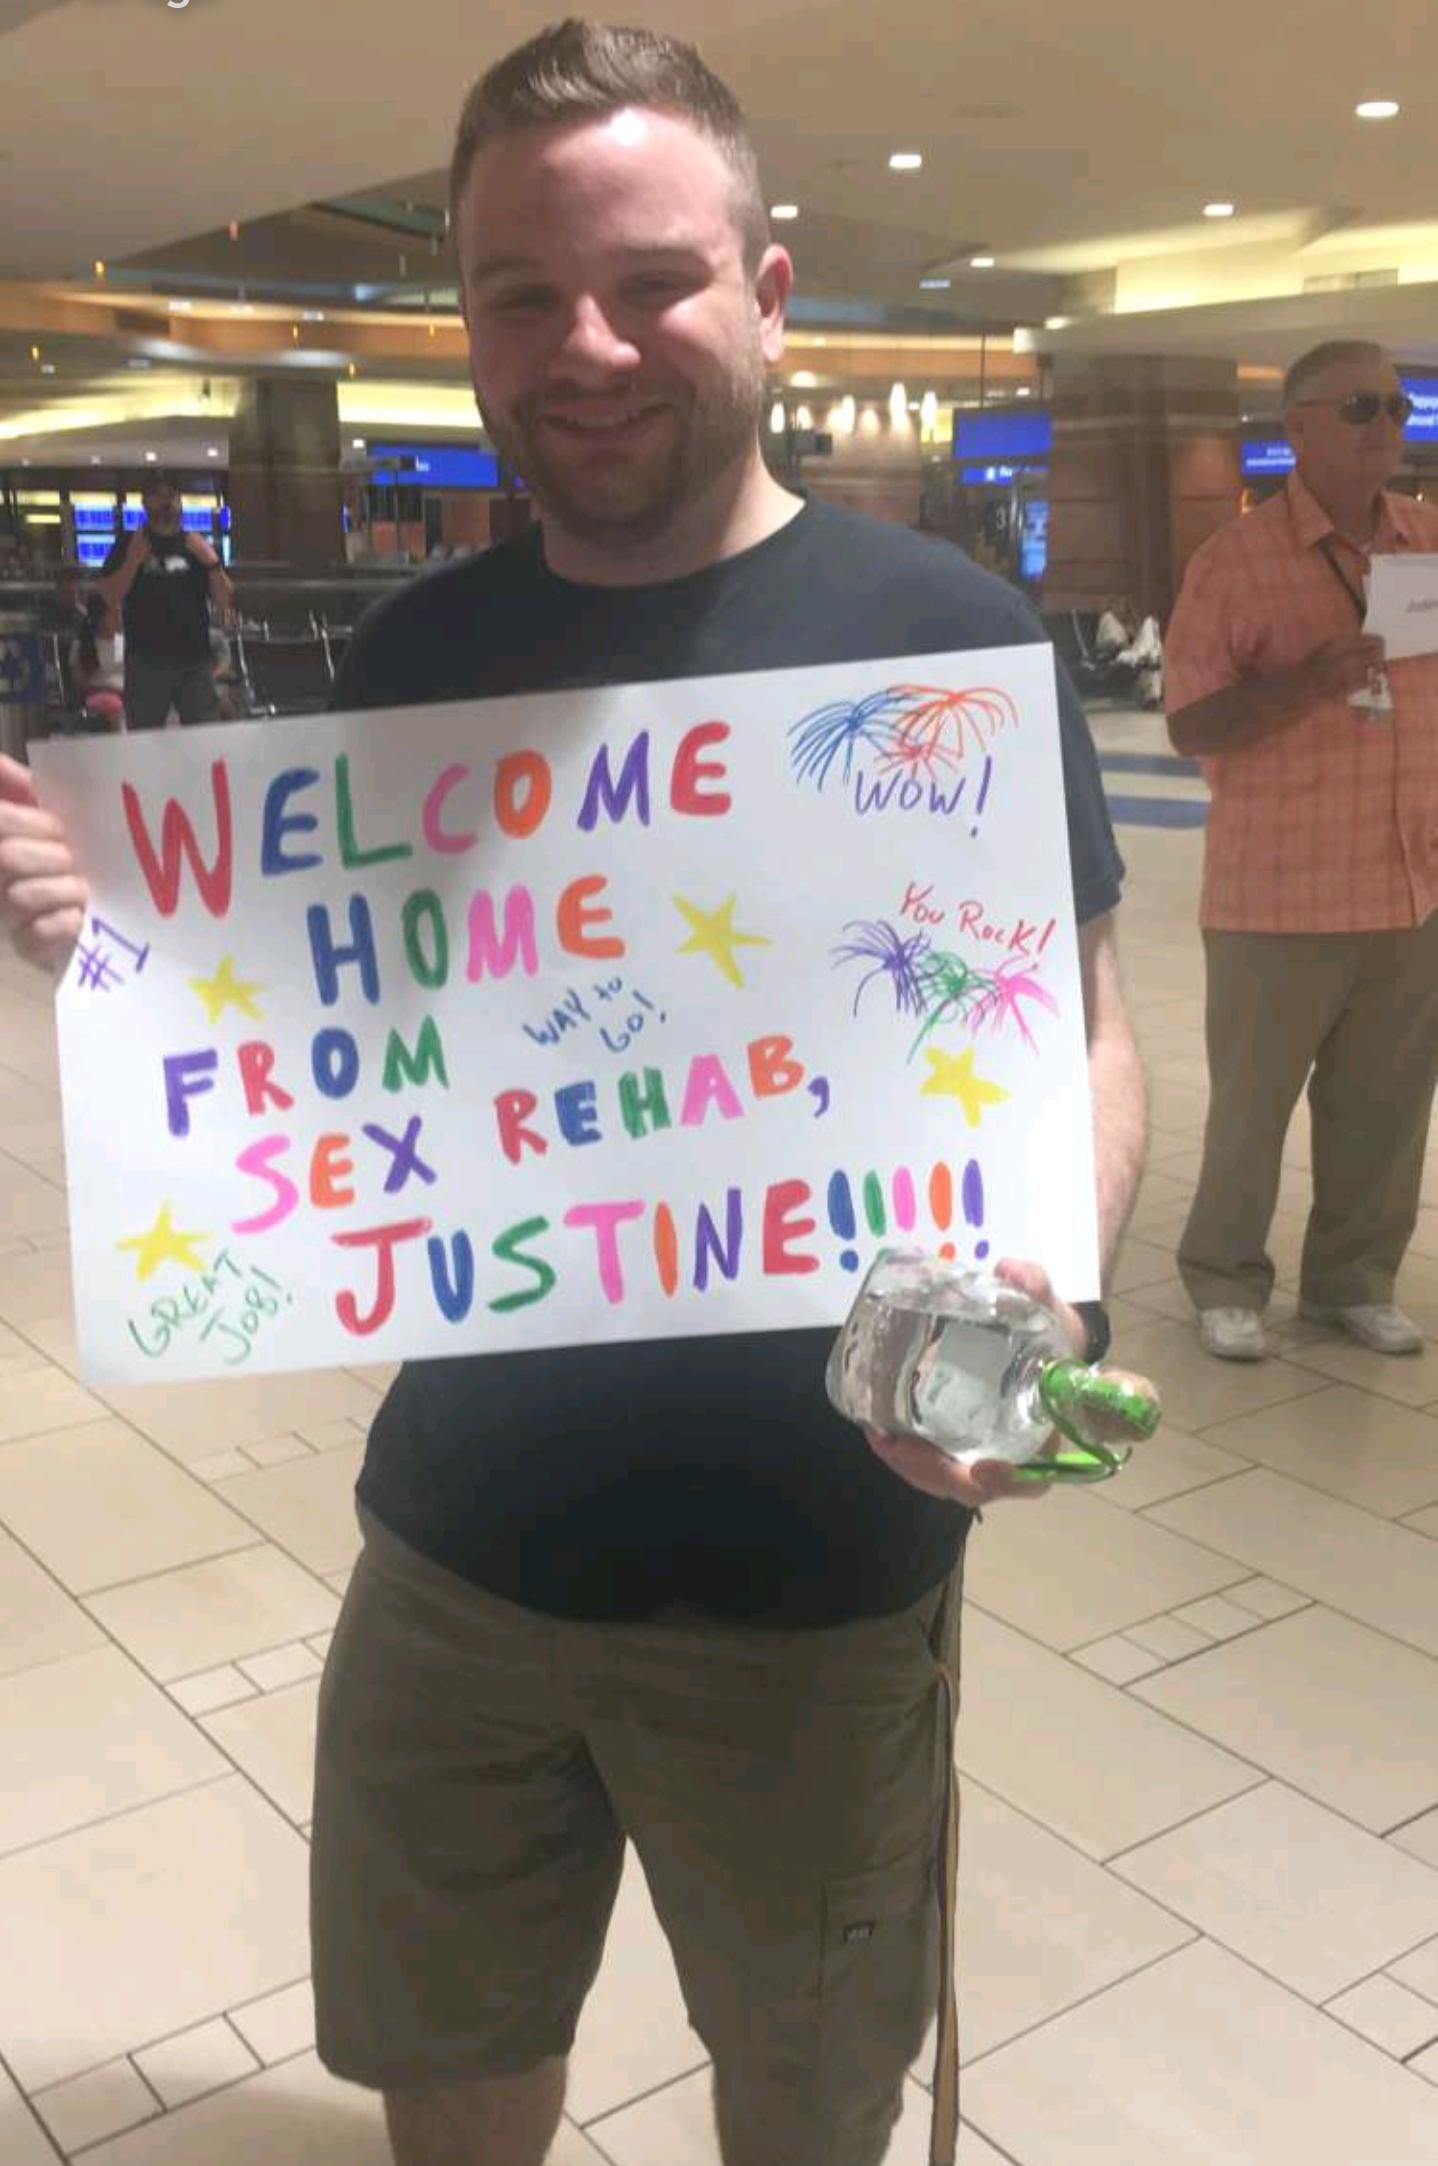 welcome home from rehab airport sign - Welcome Thai Y Home His Rock From Why not Sex Rehab, Justine Jos! G47.